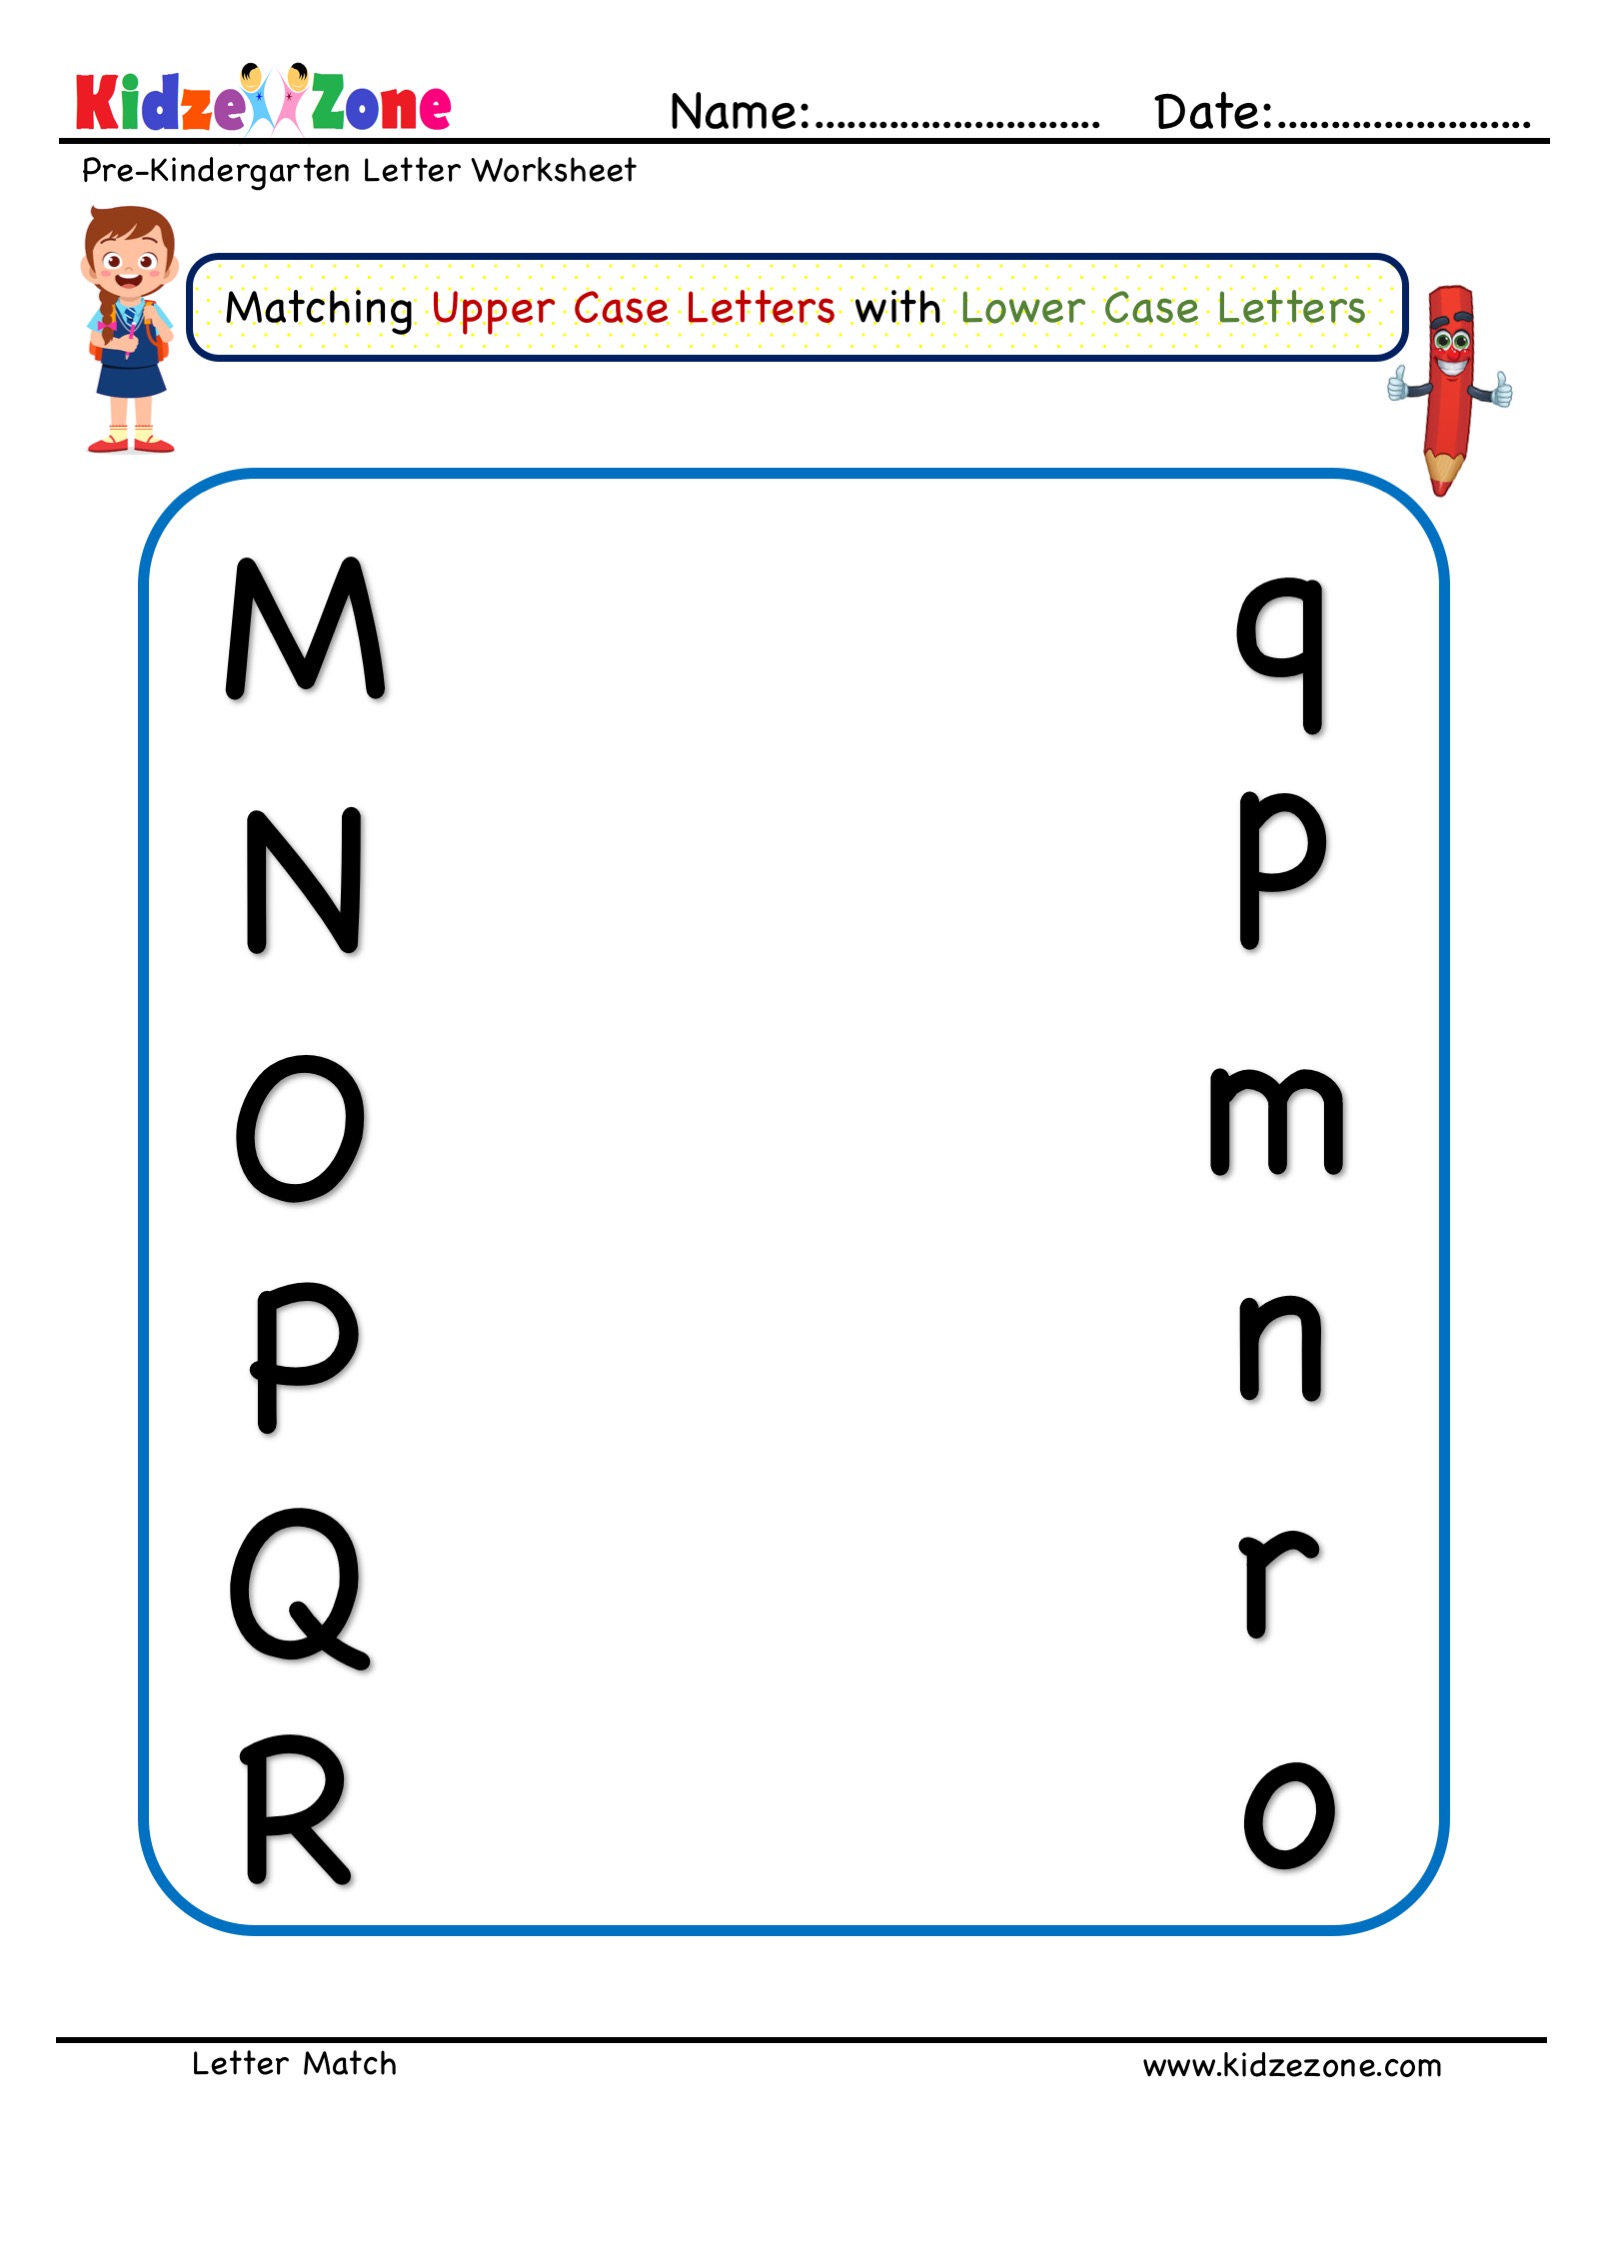 preschool letter matching upper case to lower case m to r